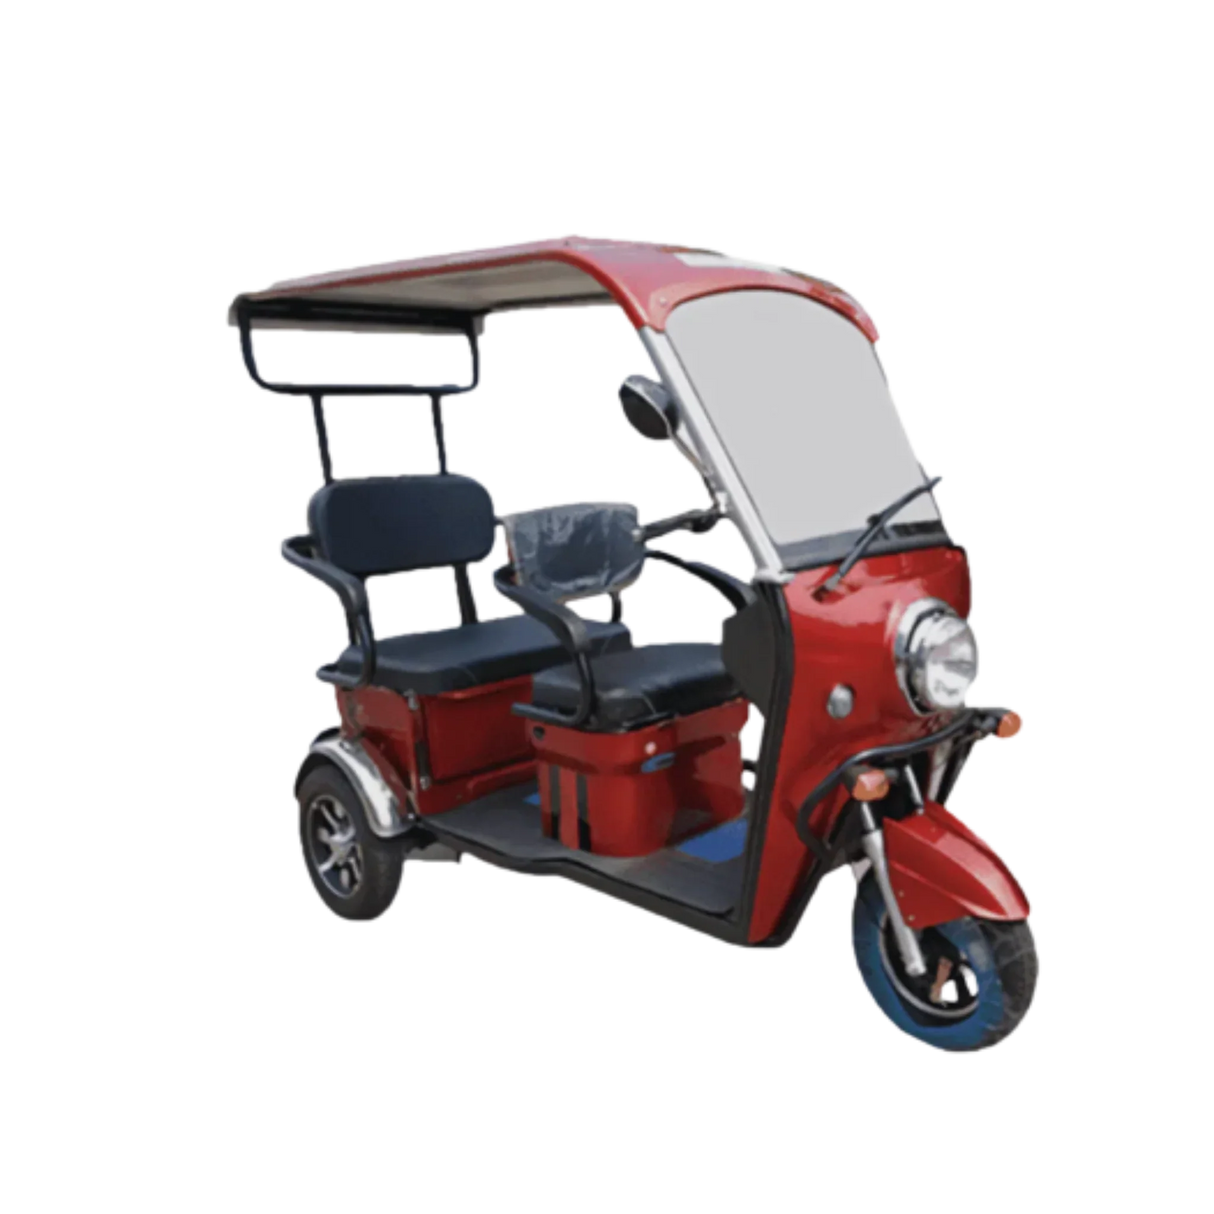 Pushpak 5000 2-Person Electric Mobility Scooter